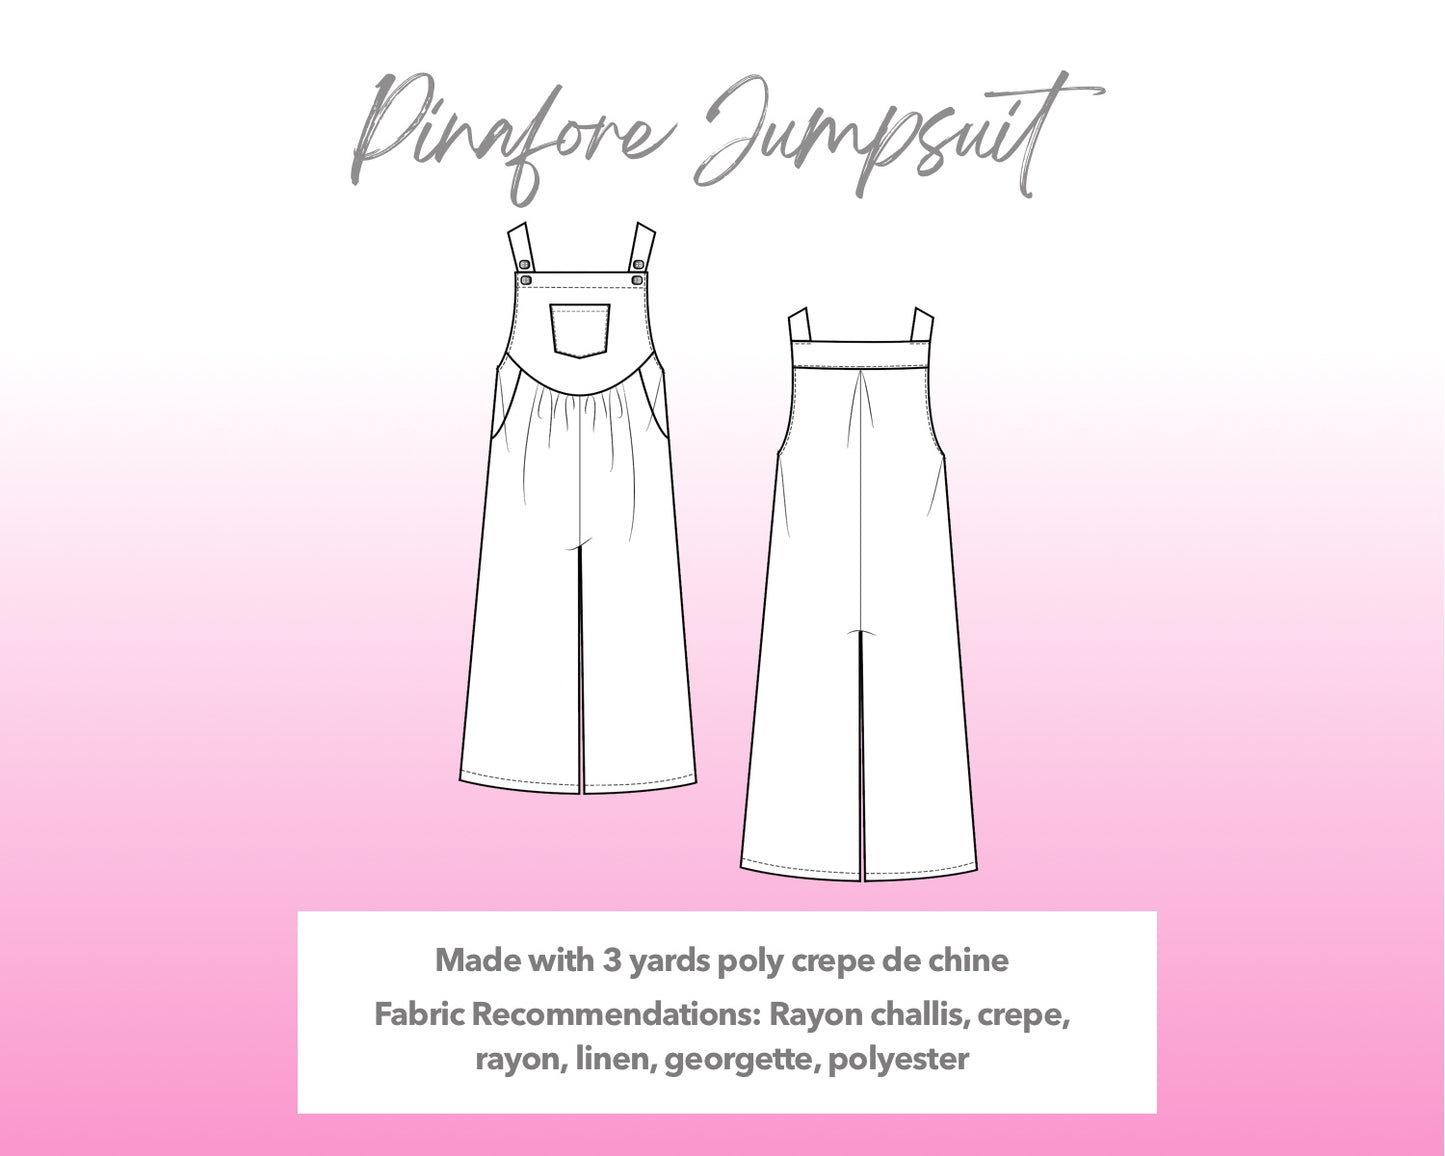 Illustration and detailed description for Pinafore Jumpsuit sewing pattern.